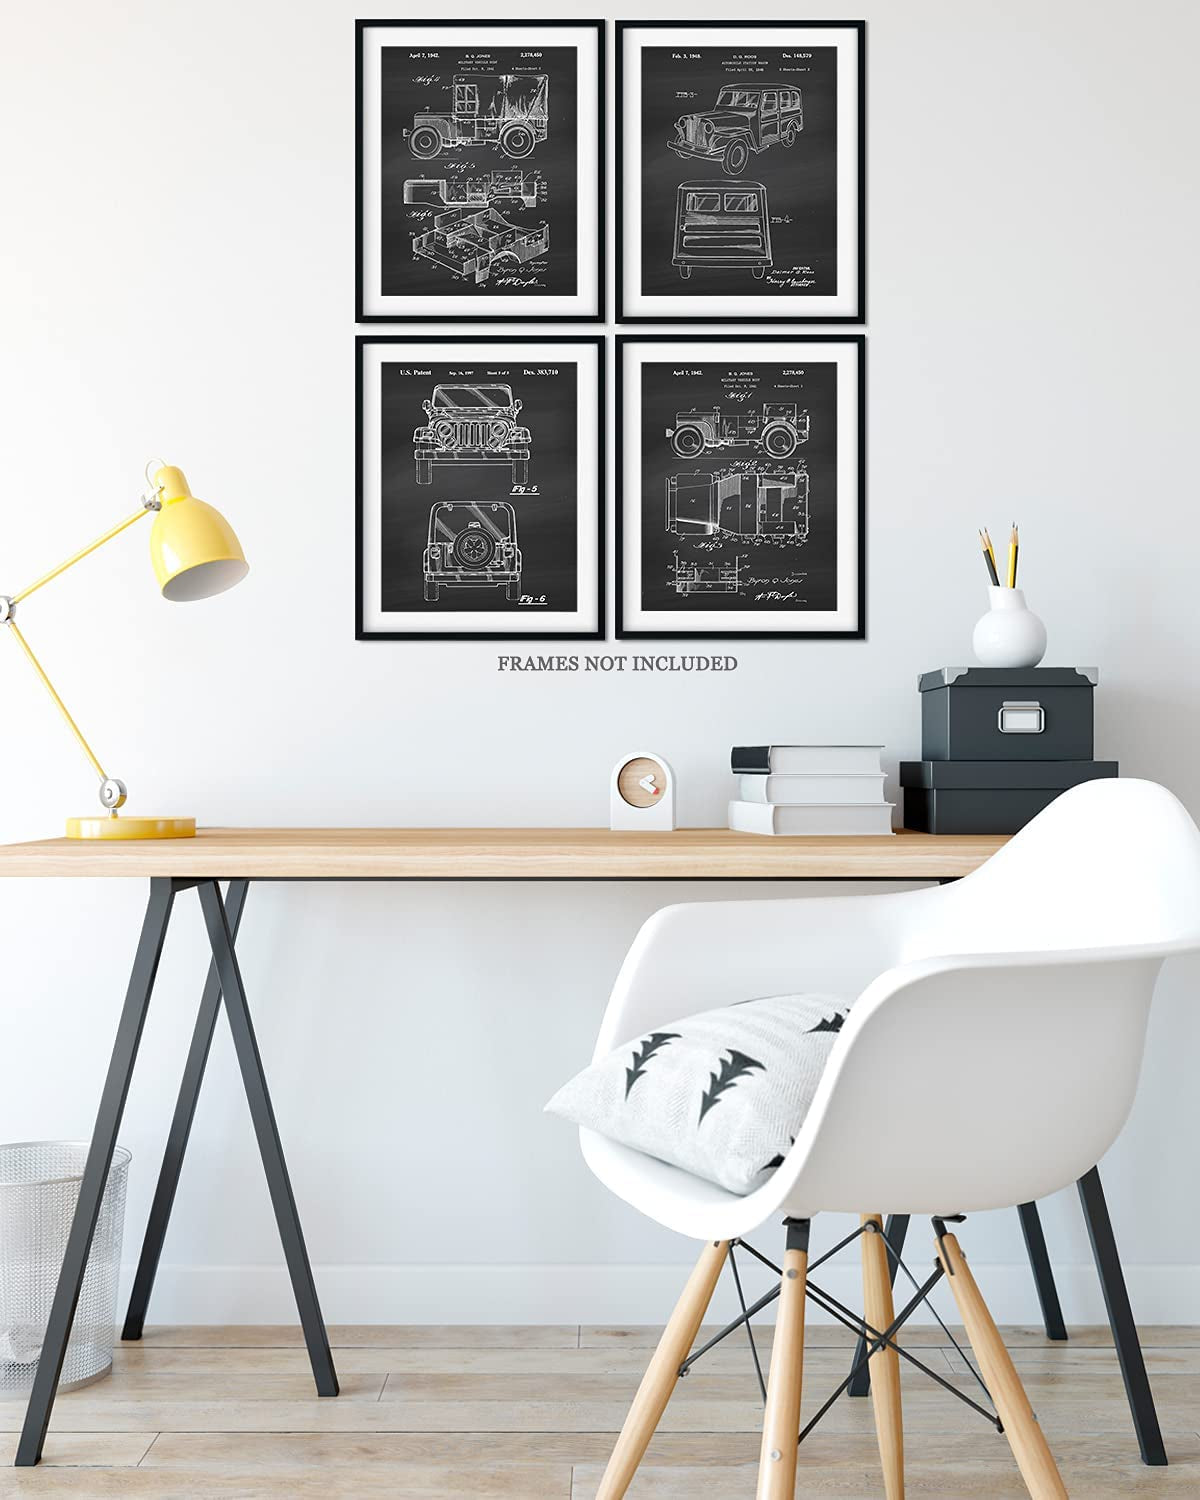 Jeep Patents - a Set of Four Jeep Patents Wall Art Decor Prints with Dark Gray Backgrounds - Unframed Artwork Printed on Photograph Paper